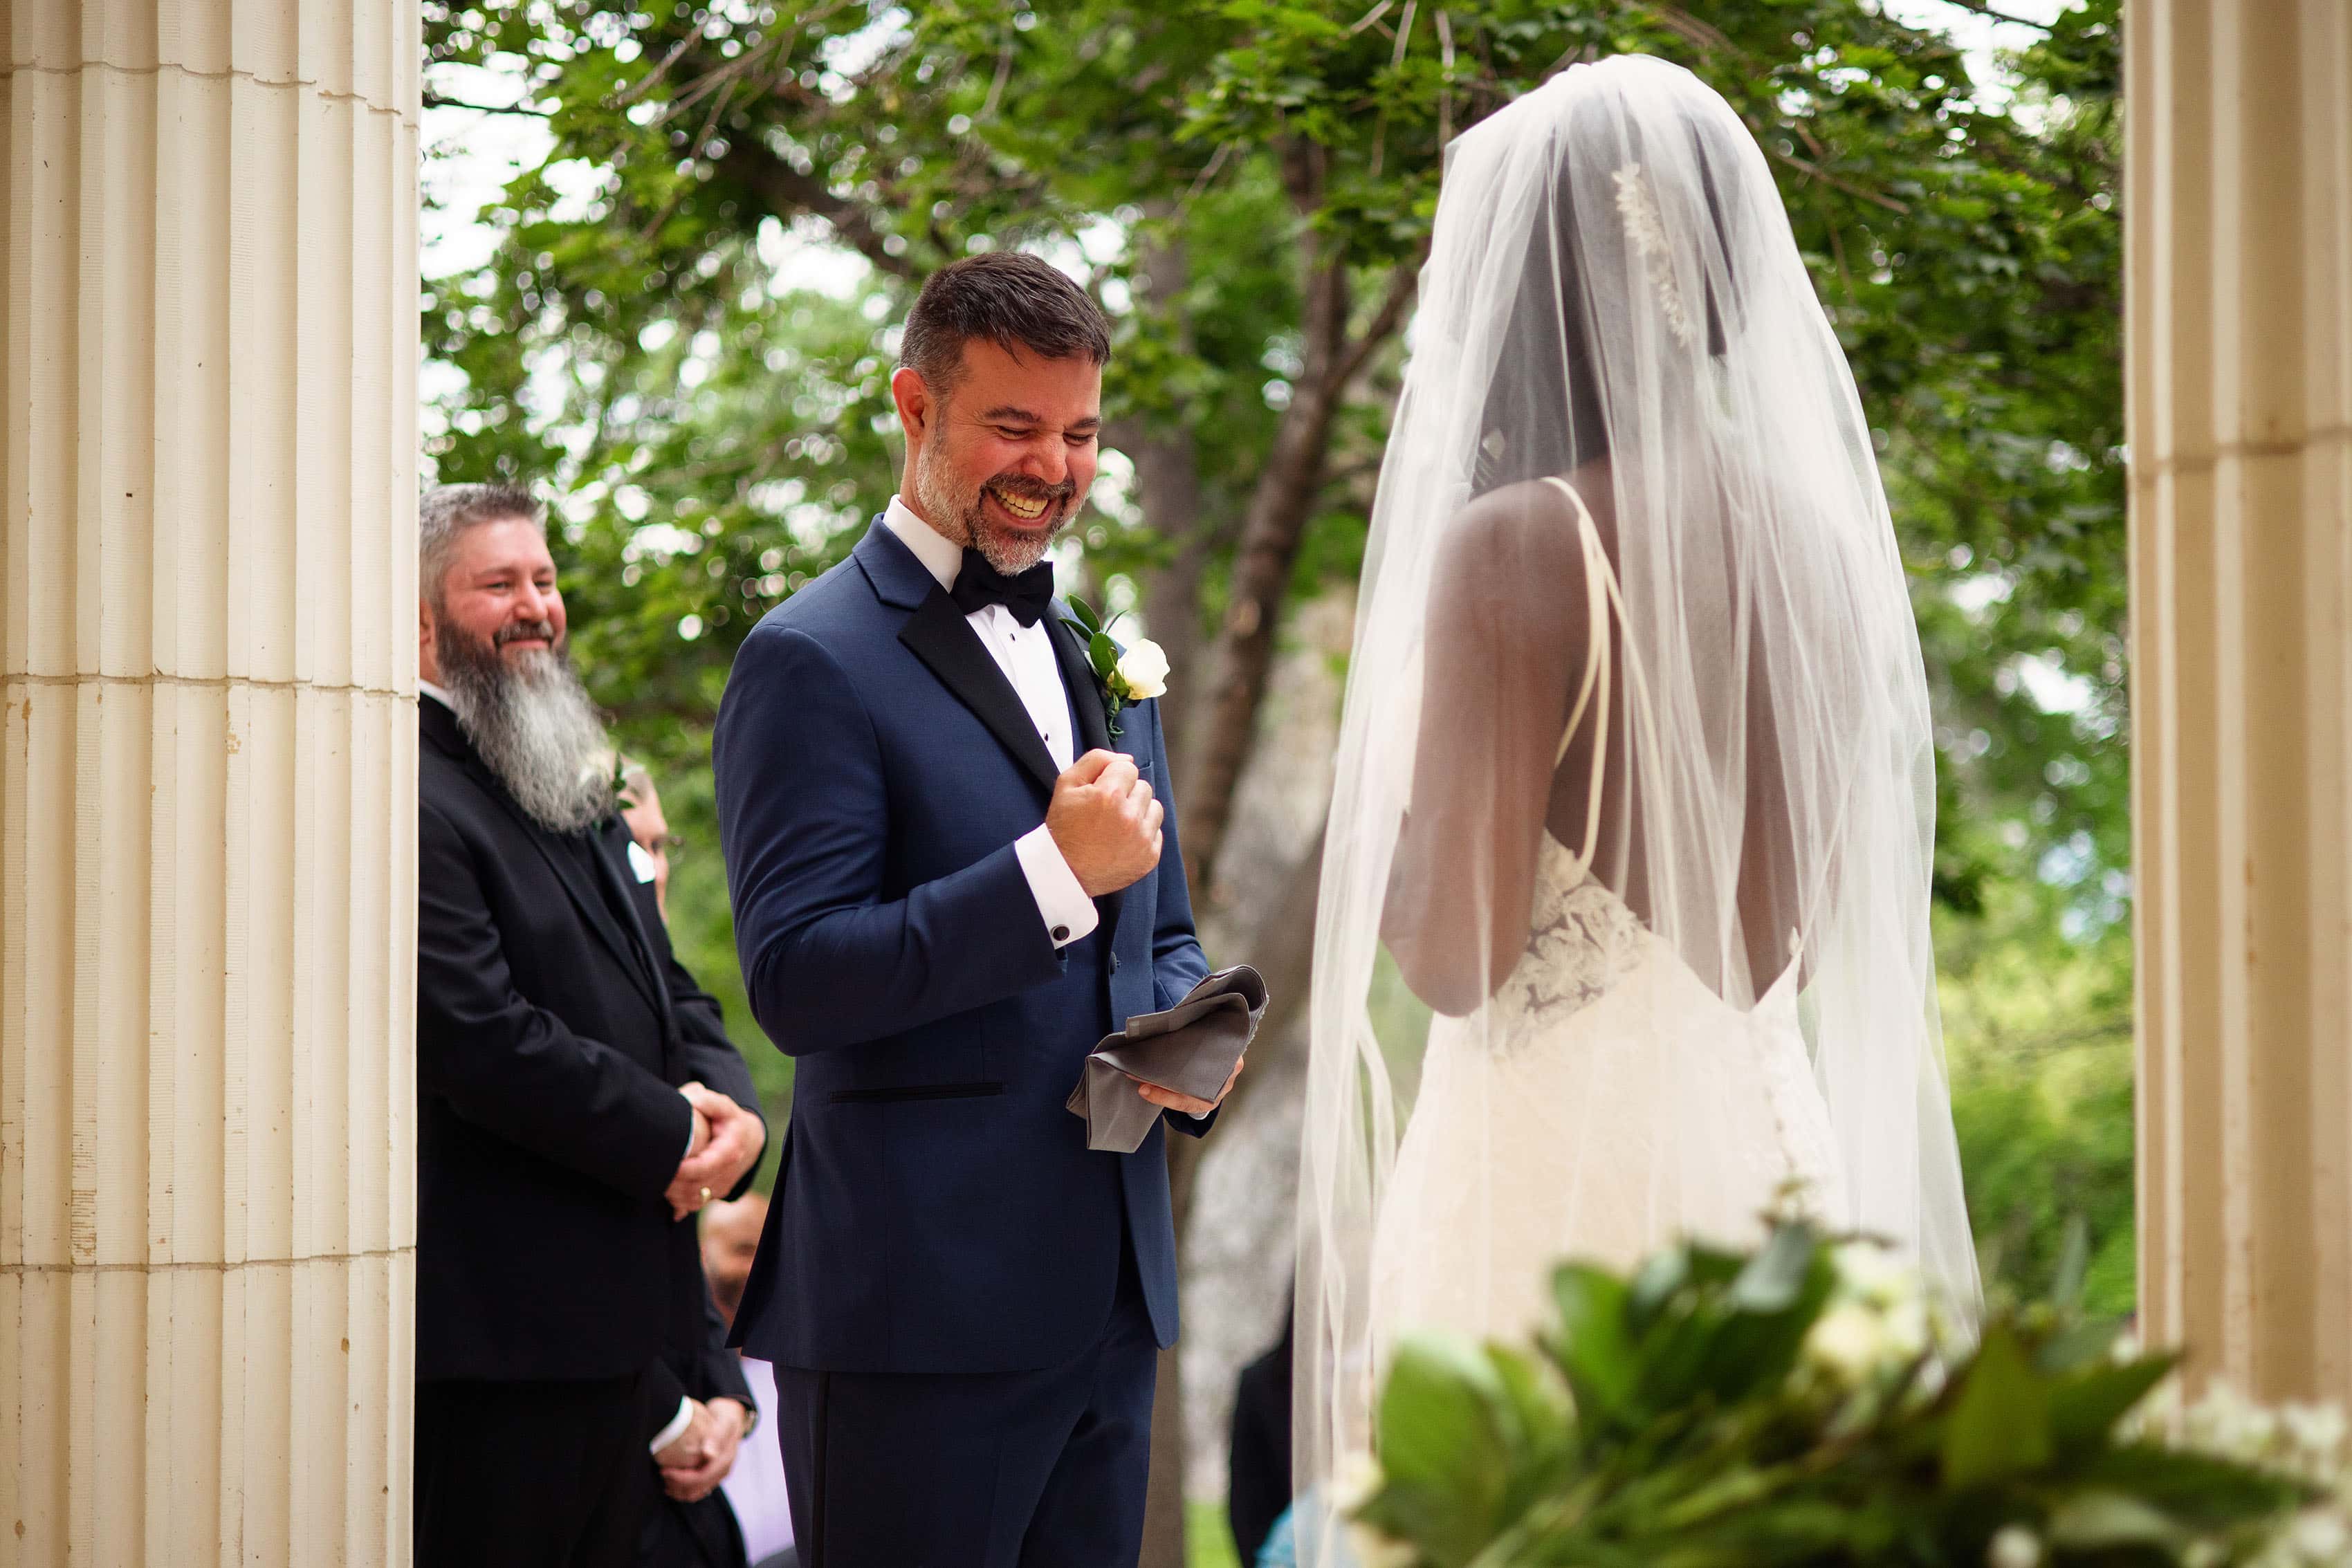 The groom reacts during the ceremony